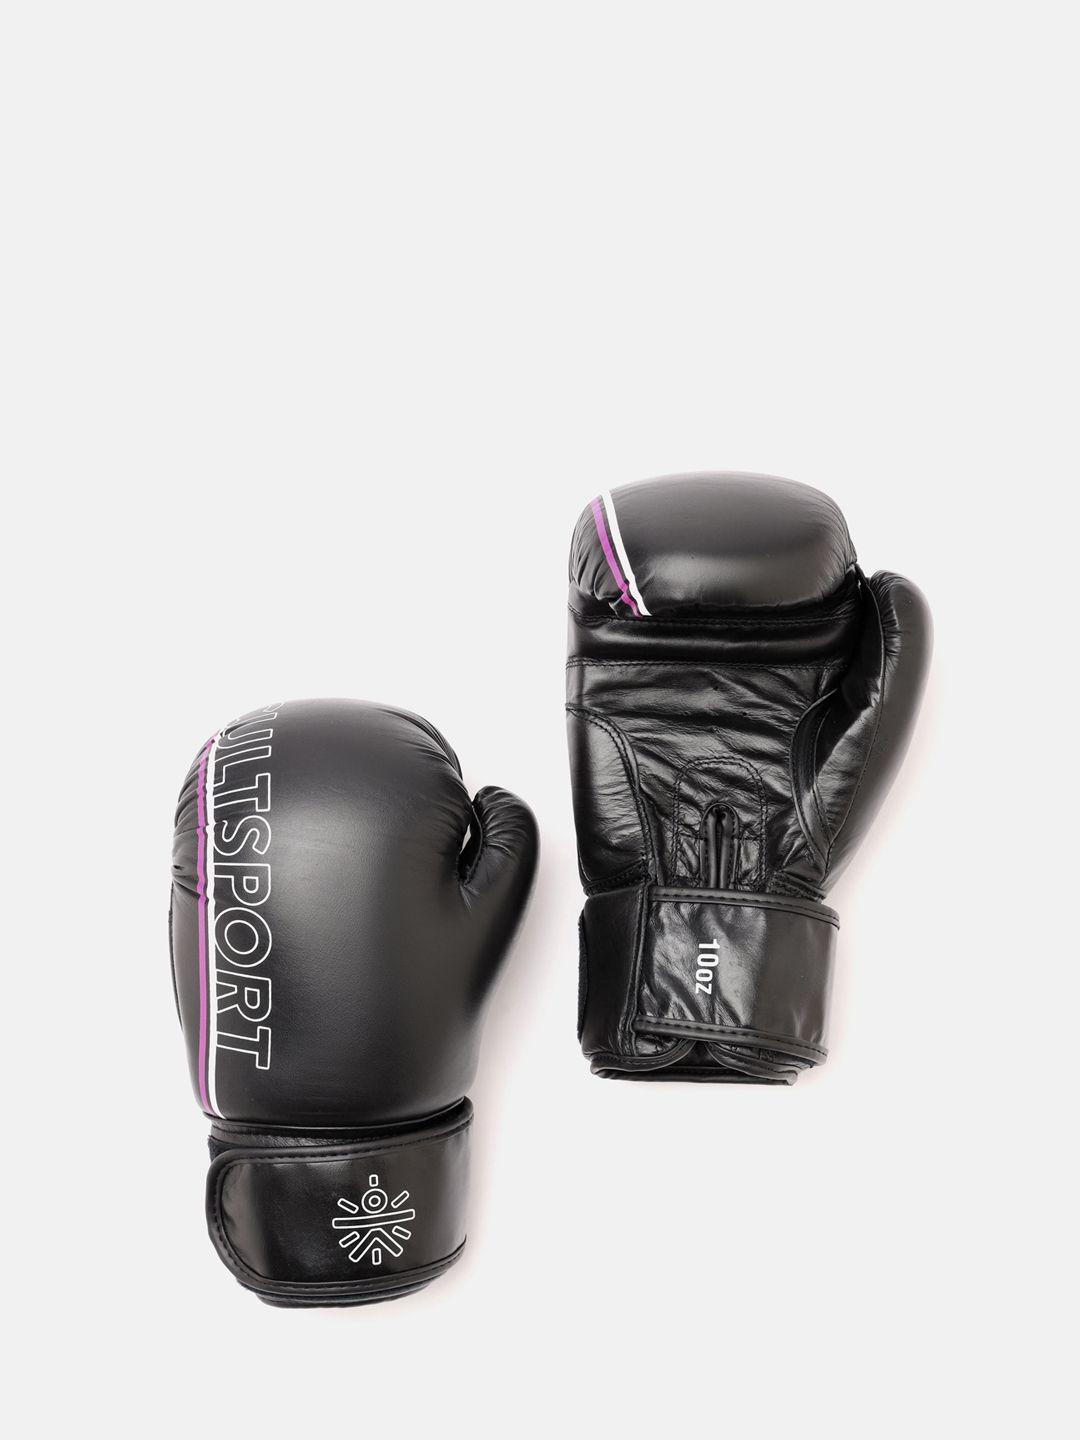 cultsport brand logo printed leather antimicrobial boxing gloves